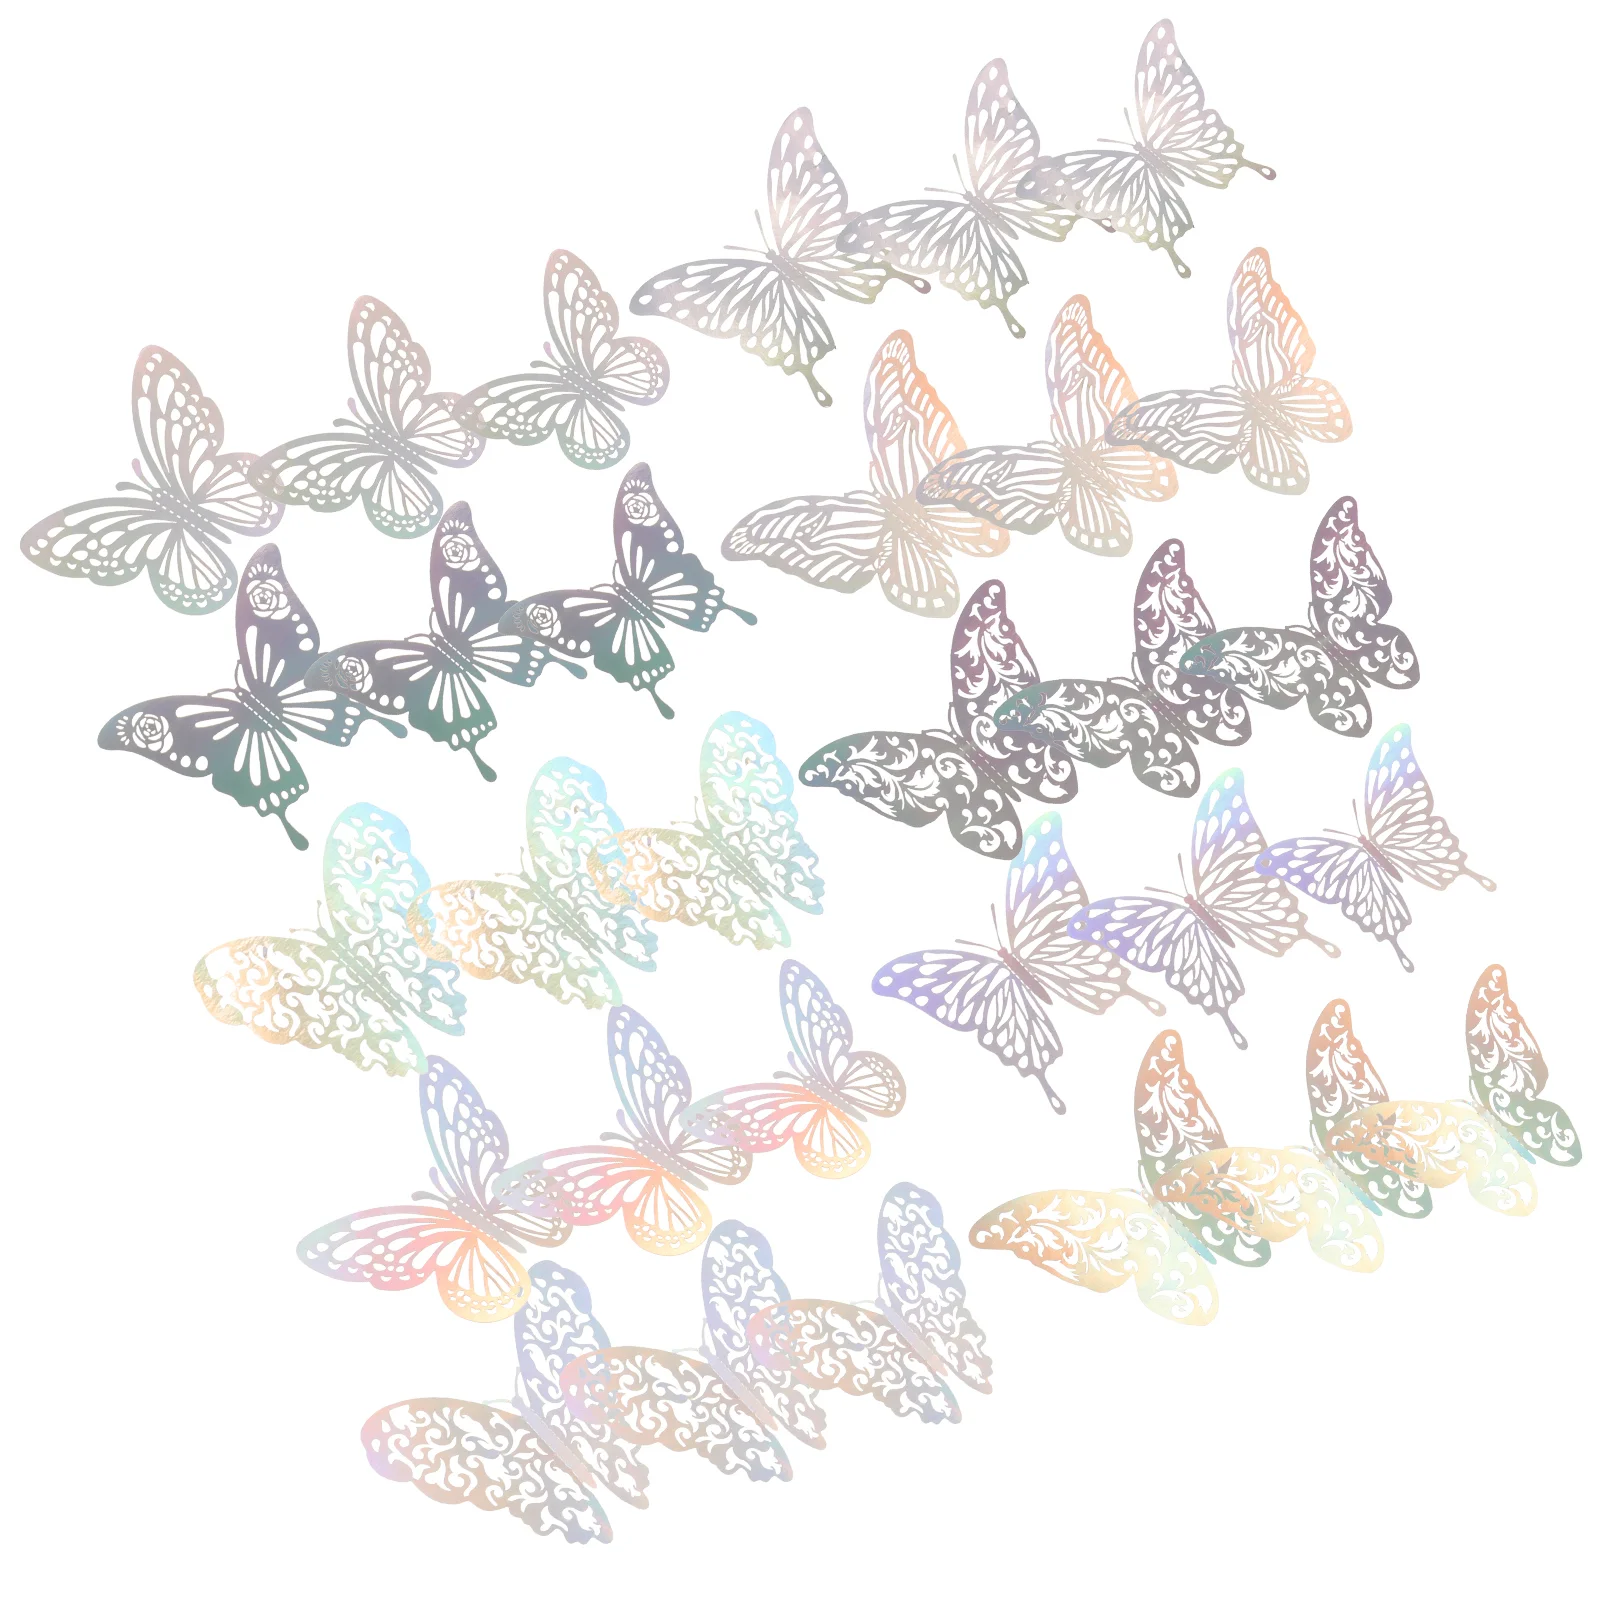 

72Pcs Chic Butterflies Wall Decal Removable Wall Decors Wall DIY Decal Bedroom Sticker